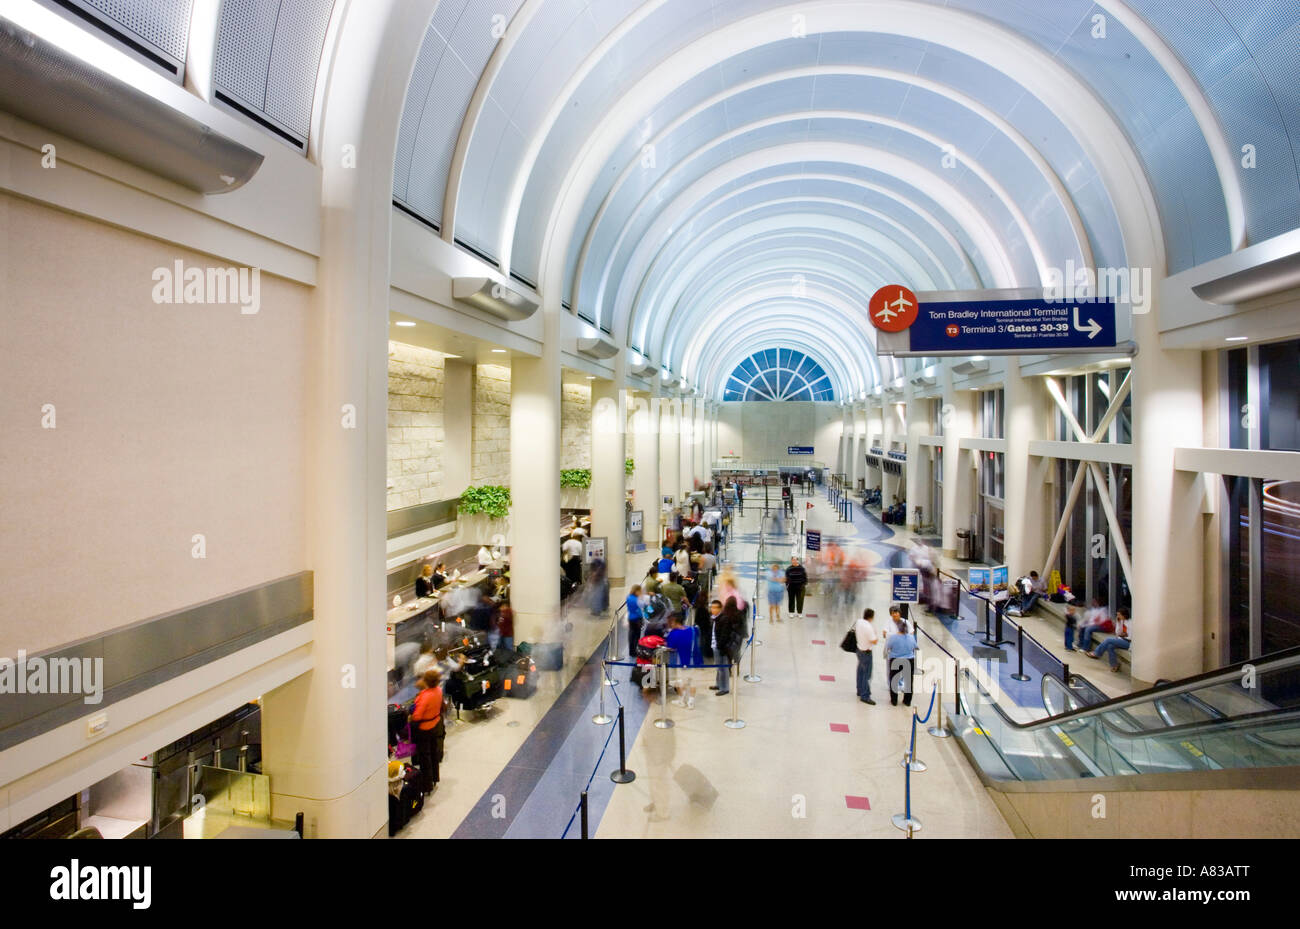 Inside the American Airlines terminal at Los Angeles International Airport Stock Photo